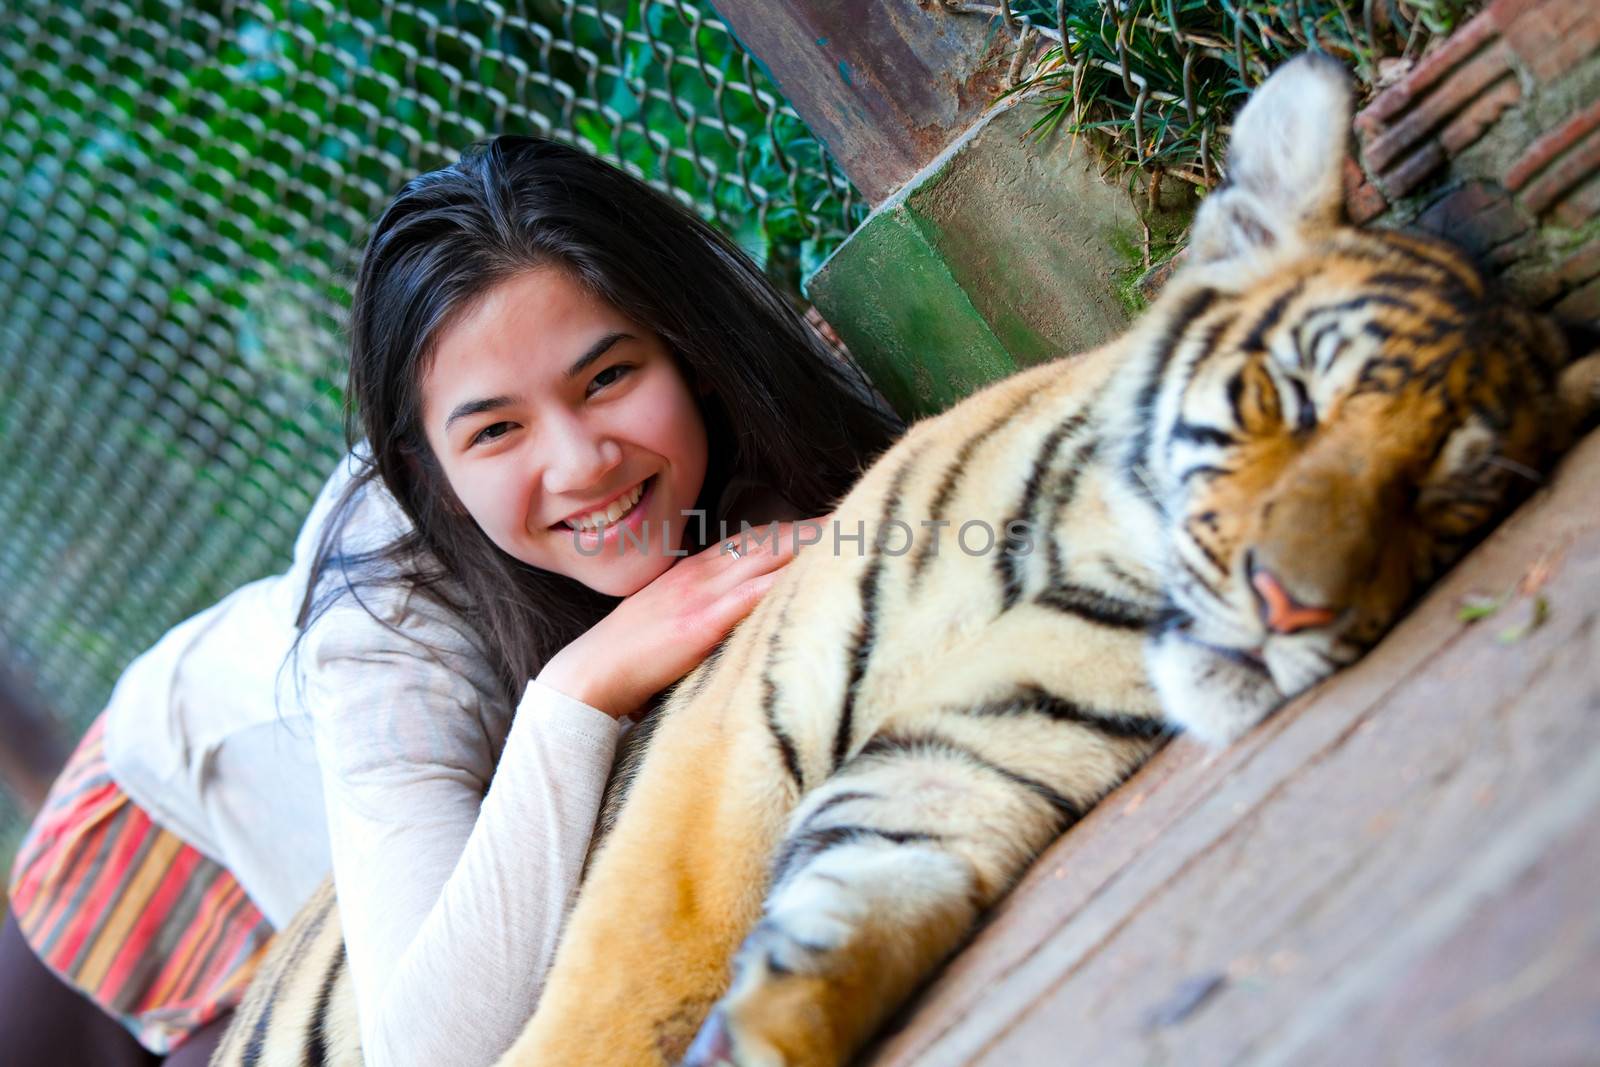 Teen girl playing with tiger cub inside cage by jarenwicklund